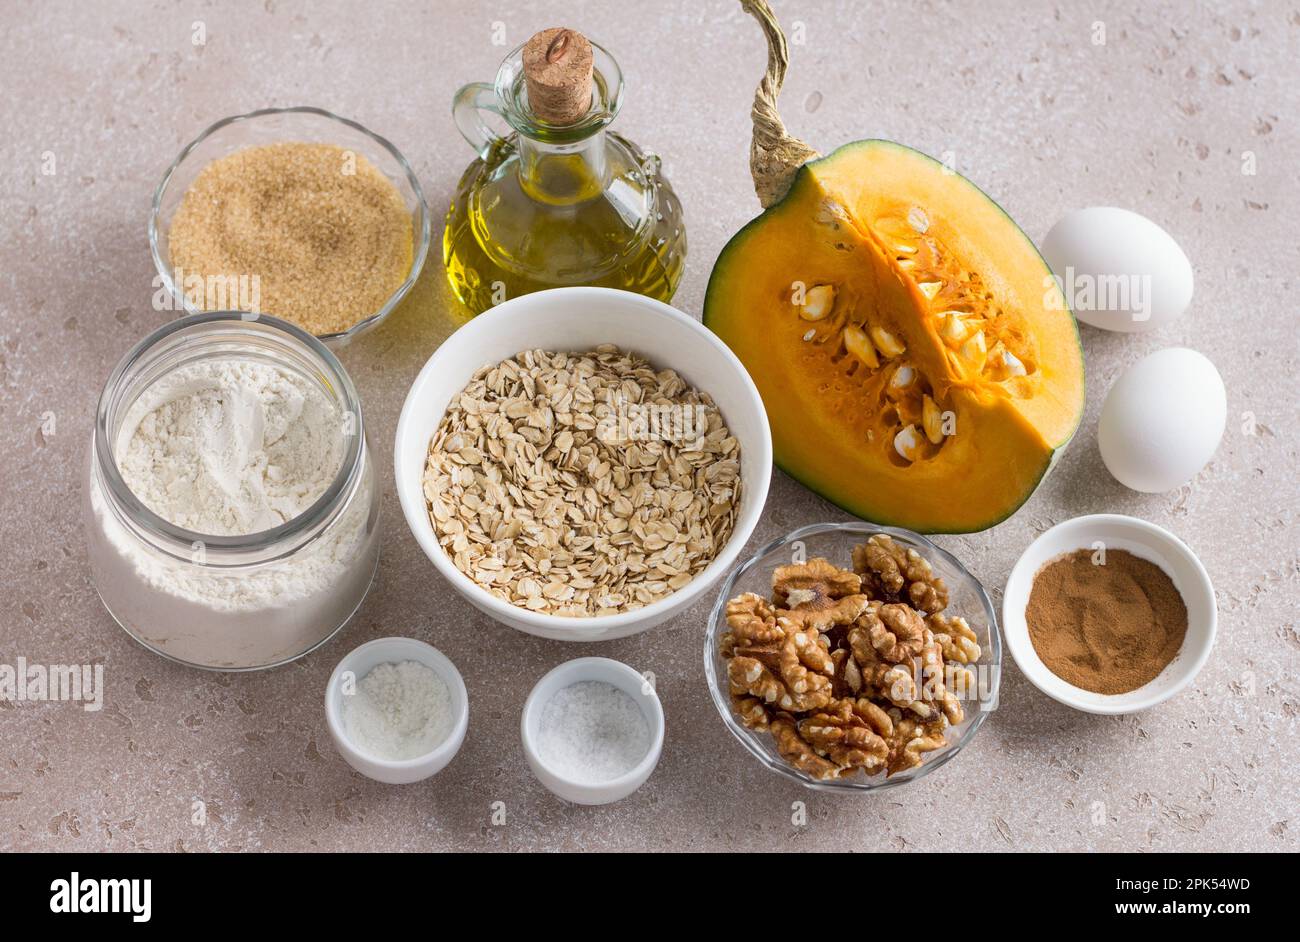 Ingredients for pumpkin muffins or casseroles: pumpkin, wheat flour, oatmeal, brown sugar, olive oil, walnuts, eggs and spices, home cooking on a beig Stock Photo